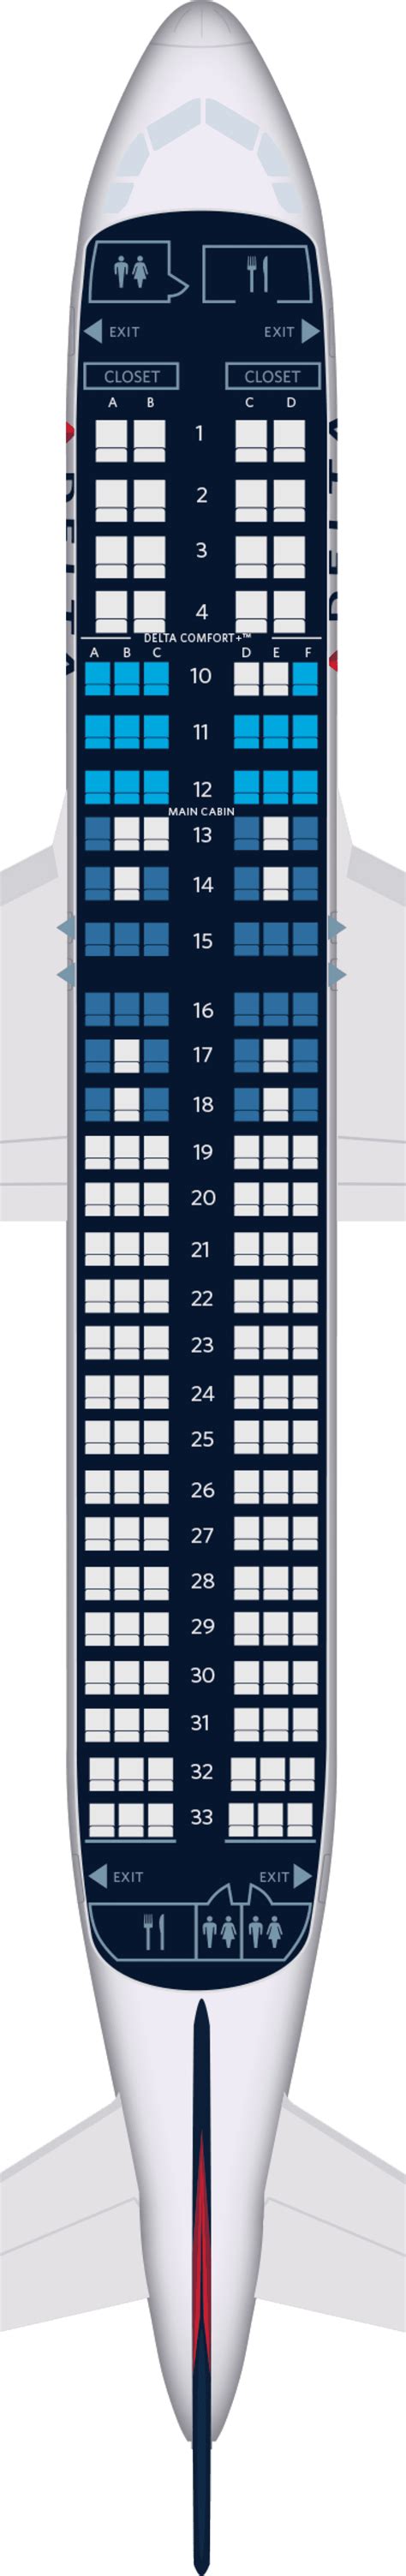 Lufthansa Airbus A Seating Chart Porn Sex Picture